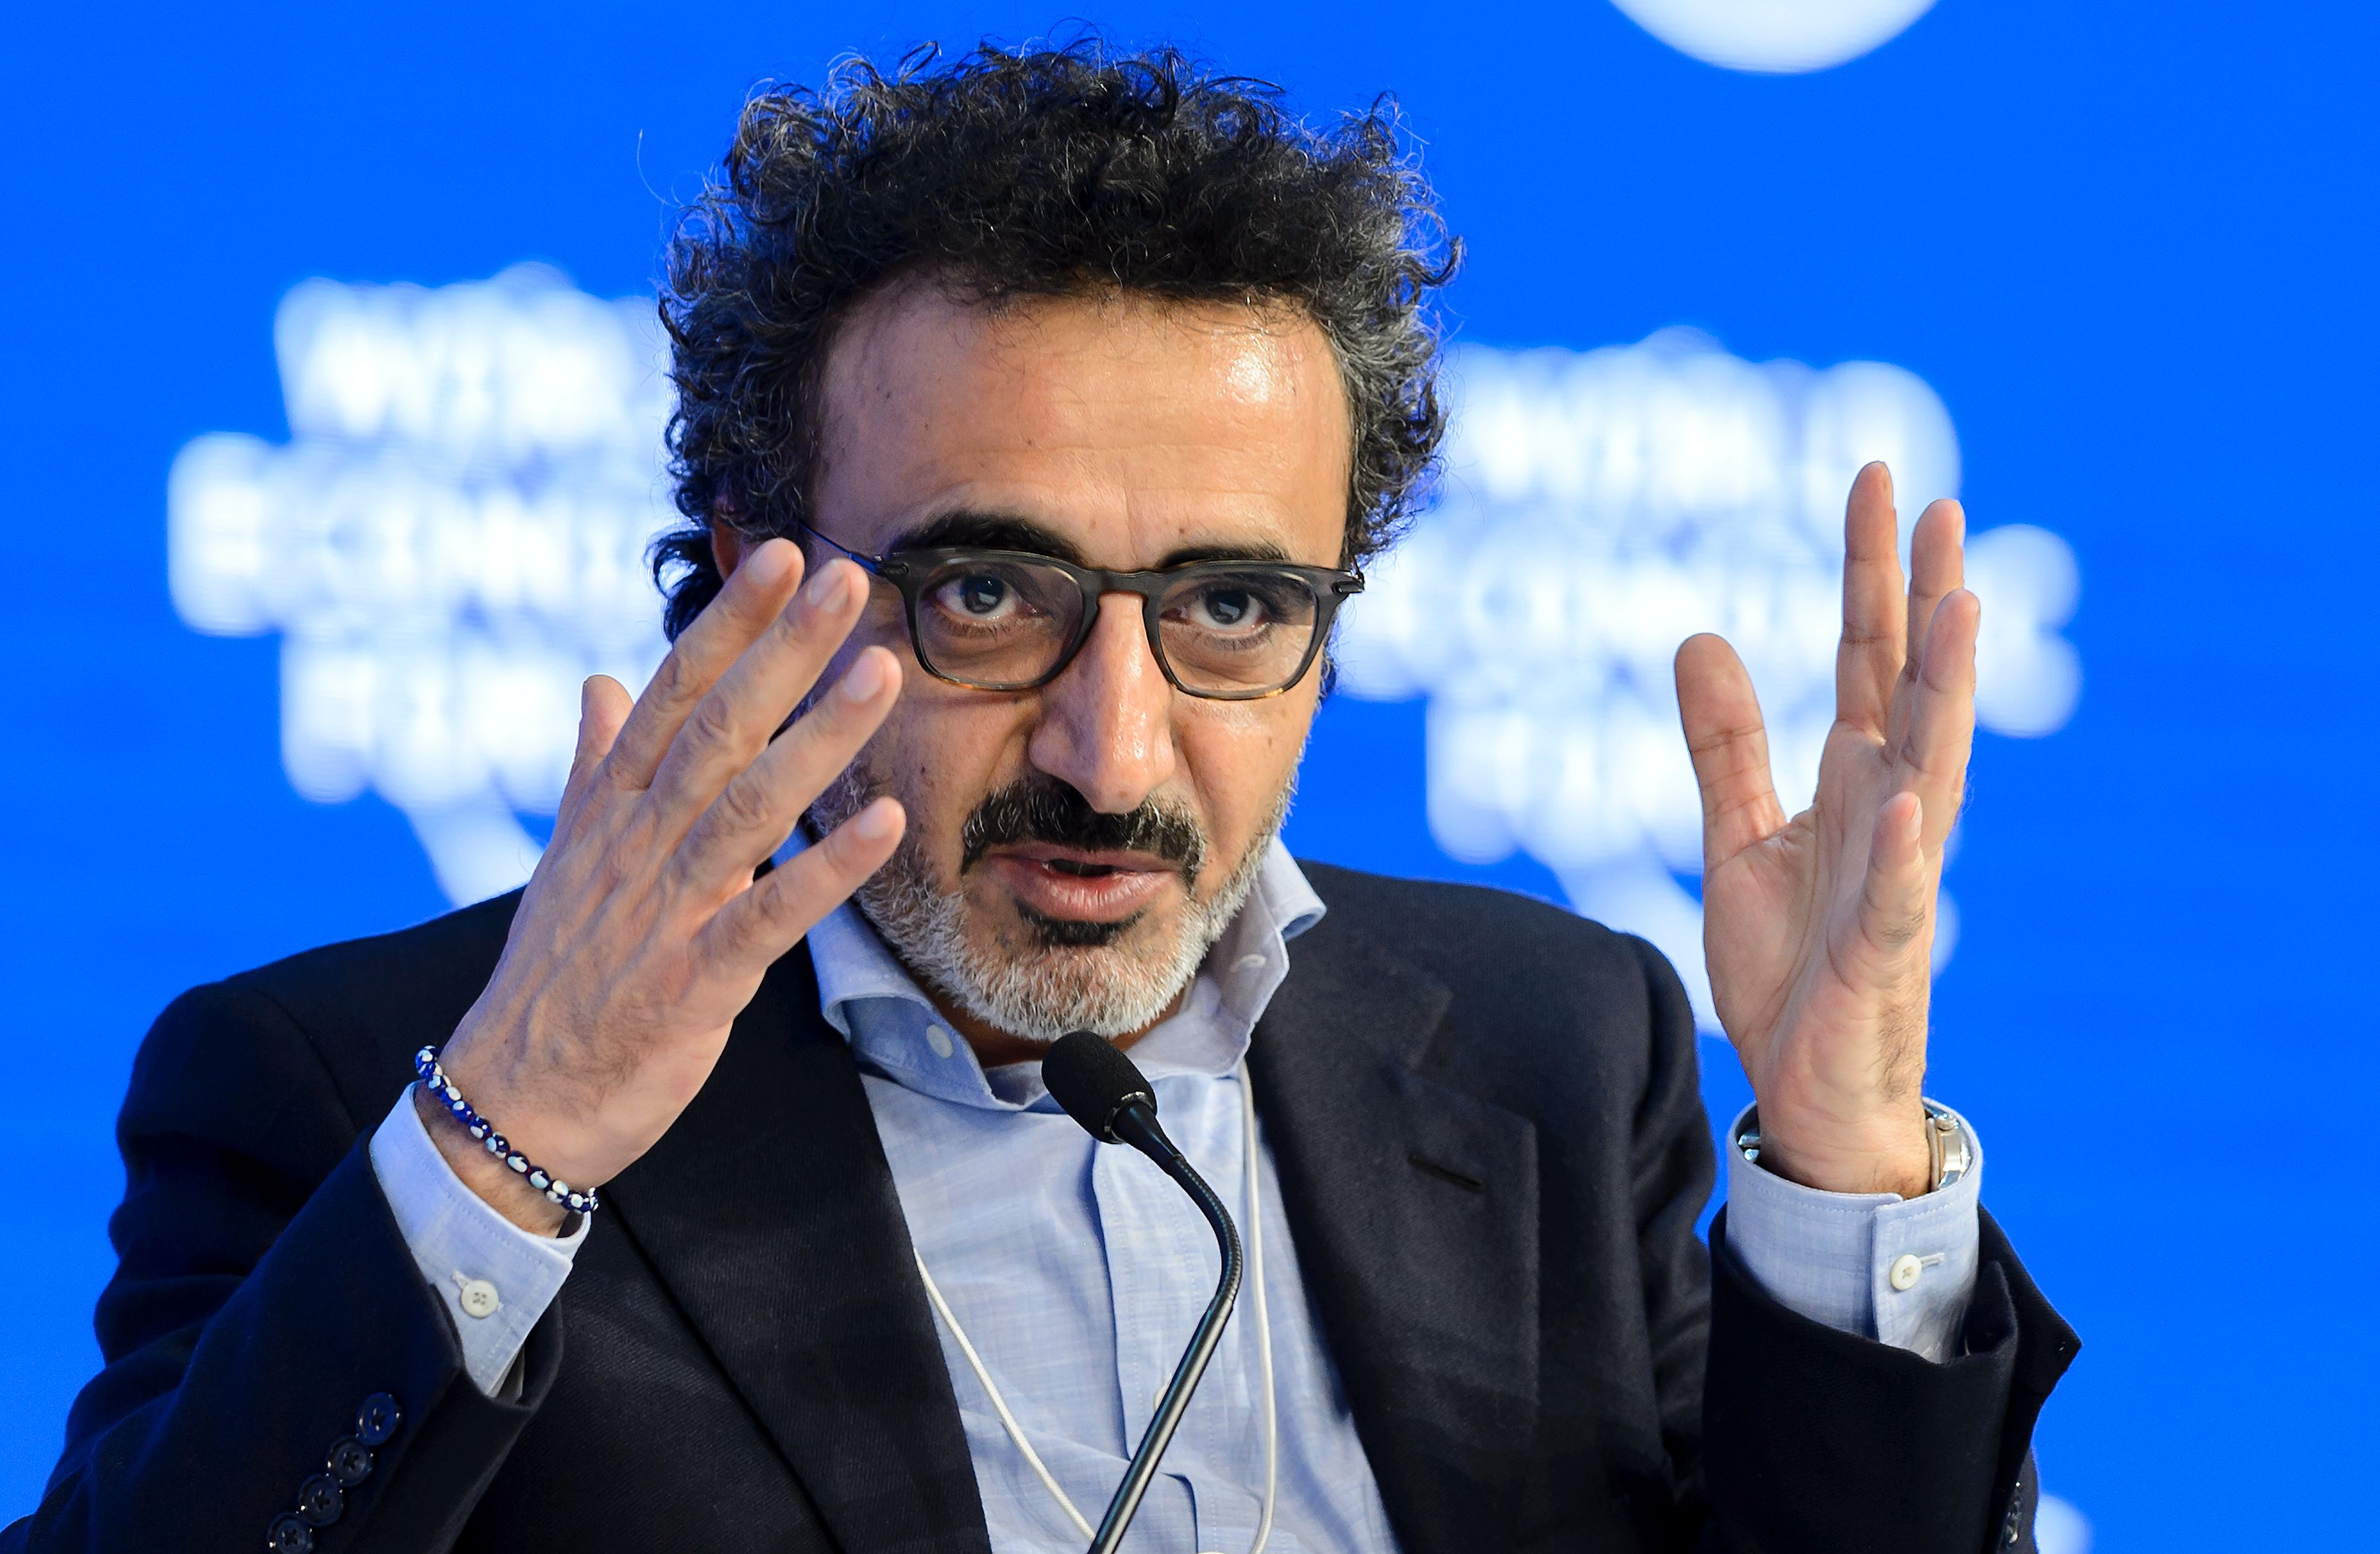 President and CEO of yogurt company Chobani Hamdi Ulukaya gestures during a session at the World Economic Forum (WEF) annual meeting in Davos, on January 20. (Fabrice Coffrini—AFP/Getty Images)